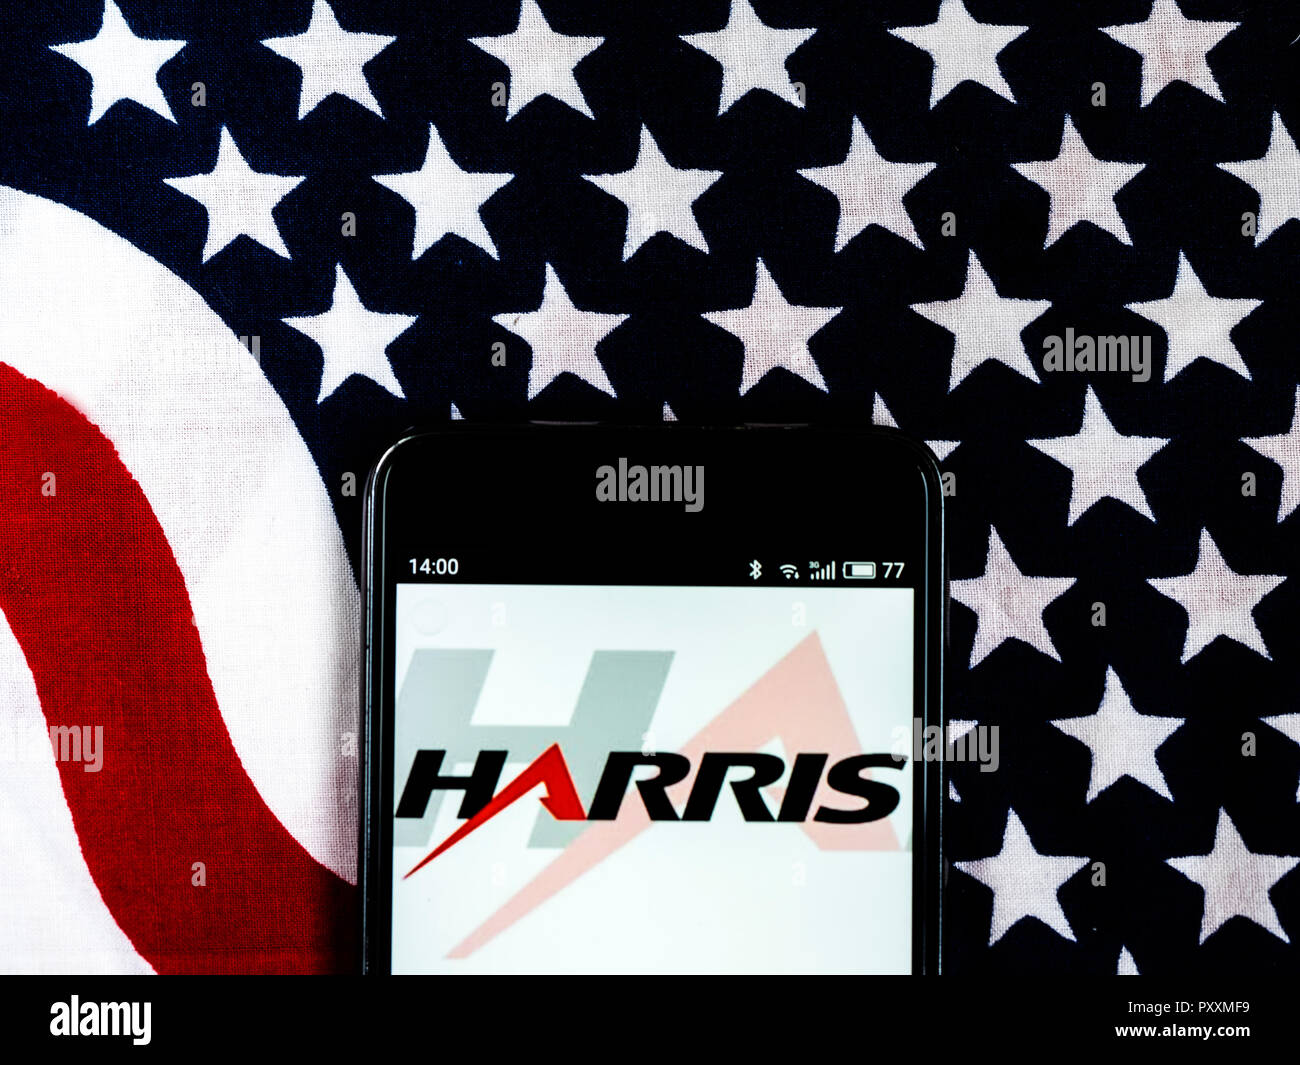 Harris Corporation Company logo seen displayed on smart phone.. Harris Corporation is an American technology company, defense contractor and information technology services provider that produces wireless equipment, tactical radios, electronic systems, night vision equipment and both terrestrial and spaceborne antennas for use in the government, defense and commercial sectors. Stock Photo